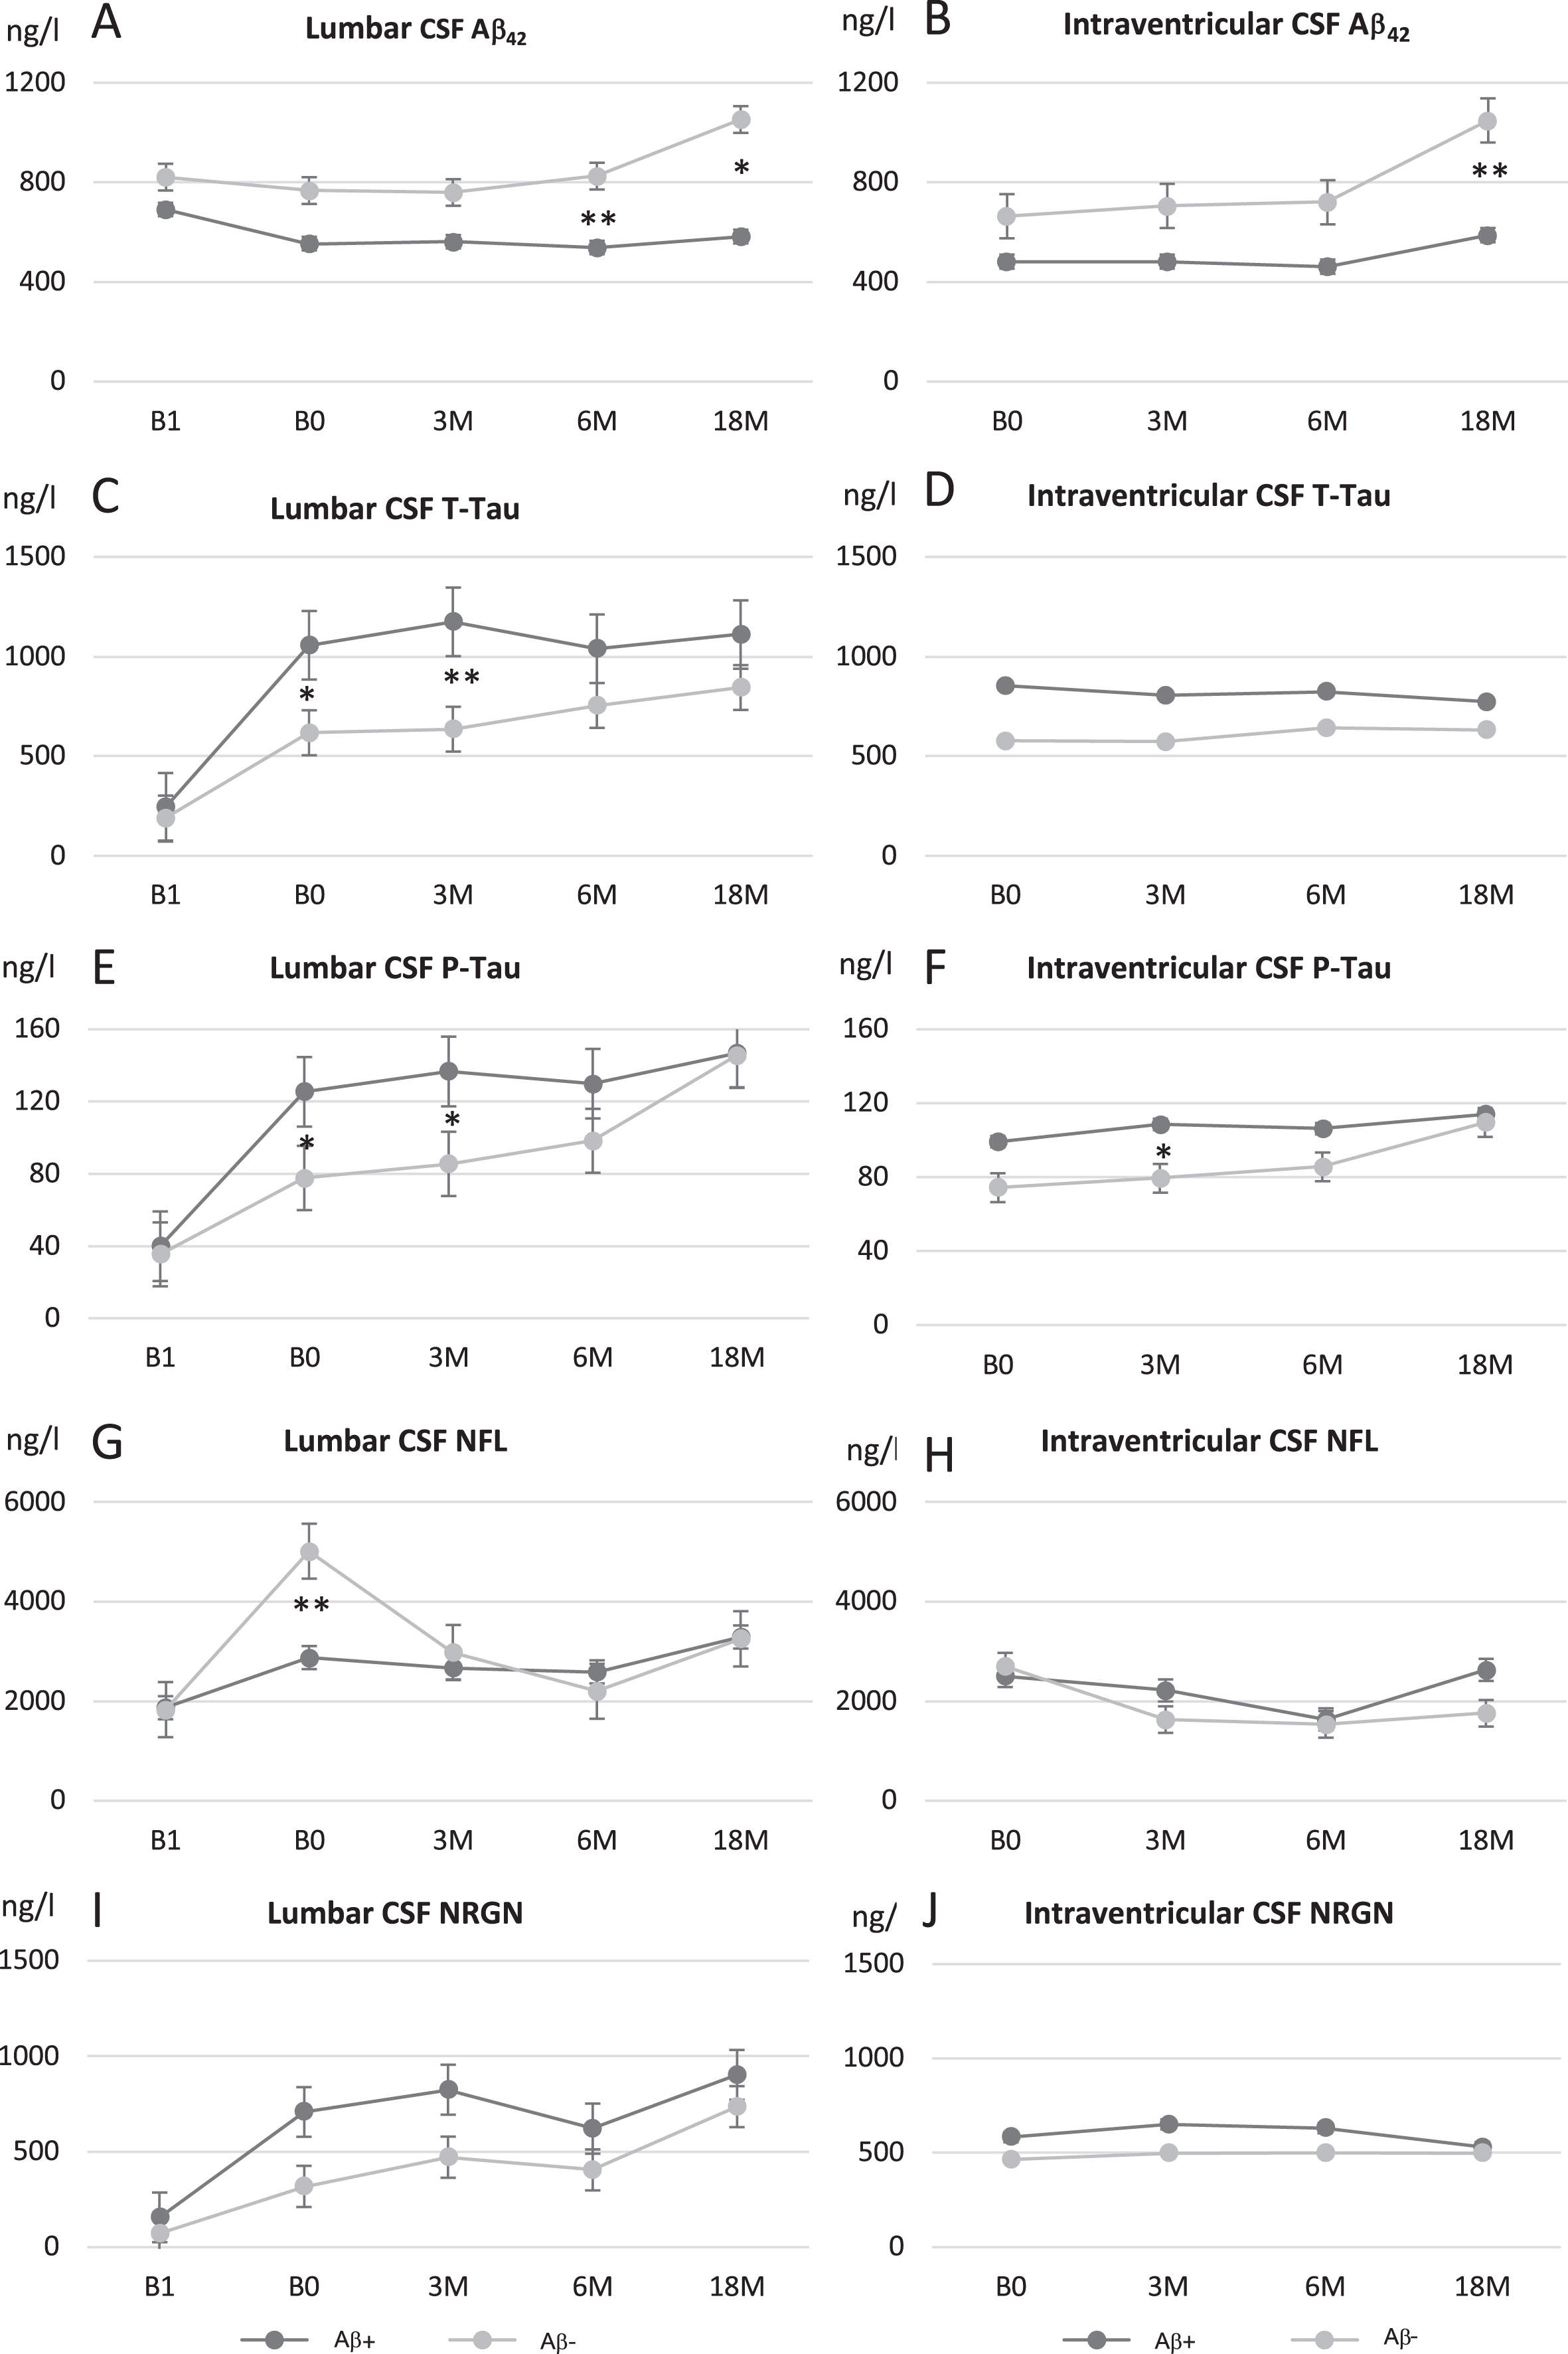 Longitudinal analysis of biomarkers of neurodegeneration in lumbar (A, C, E, G, and I) and ventricular (B, D, F, H, and J) CSF for amyloid-β42 (Aβ42; A, B), total tau (T-tau; C, D), tau phosphorylated at threonine 181 (P-tau; E, F), neurofilament light (NFL; G, H), and neurogranin (NRGN; I, J). iNPH patients were grouped into to biopsy positive (dark gray) and biopsy negative (light gray) patients based on the presence or absence of Aβ pathology in their corresponding frontal biopsy. Values expressed as means±standard error. *p < 0.05; **p < 0.01 between biopsy-positive and -negative patients in specific time point. B1, pre-surgery sample collection time point; B0, baseline visit of the follow-up; 3 M, three-month study visit; 6 M, six-month study visit; 18 M, 18-month study visit; L-CSF, cerebrospinal fluid collected with lumbar puncture; V-CSF, cerebrospinal fluid collected with shunt valve puncture.